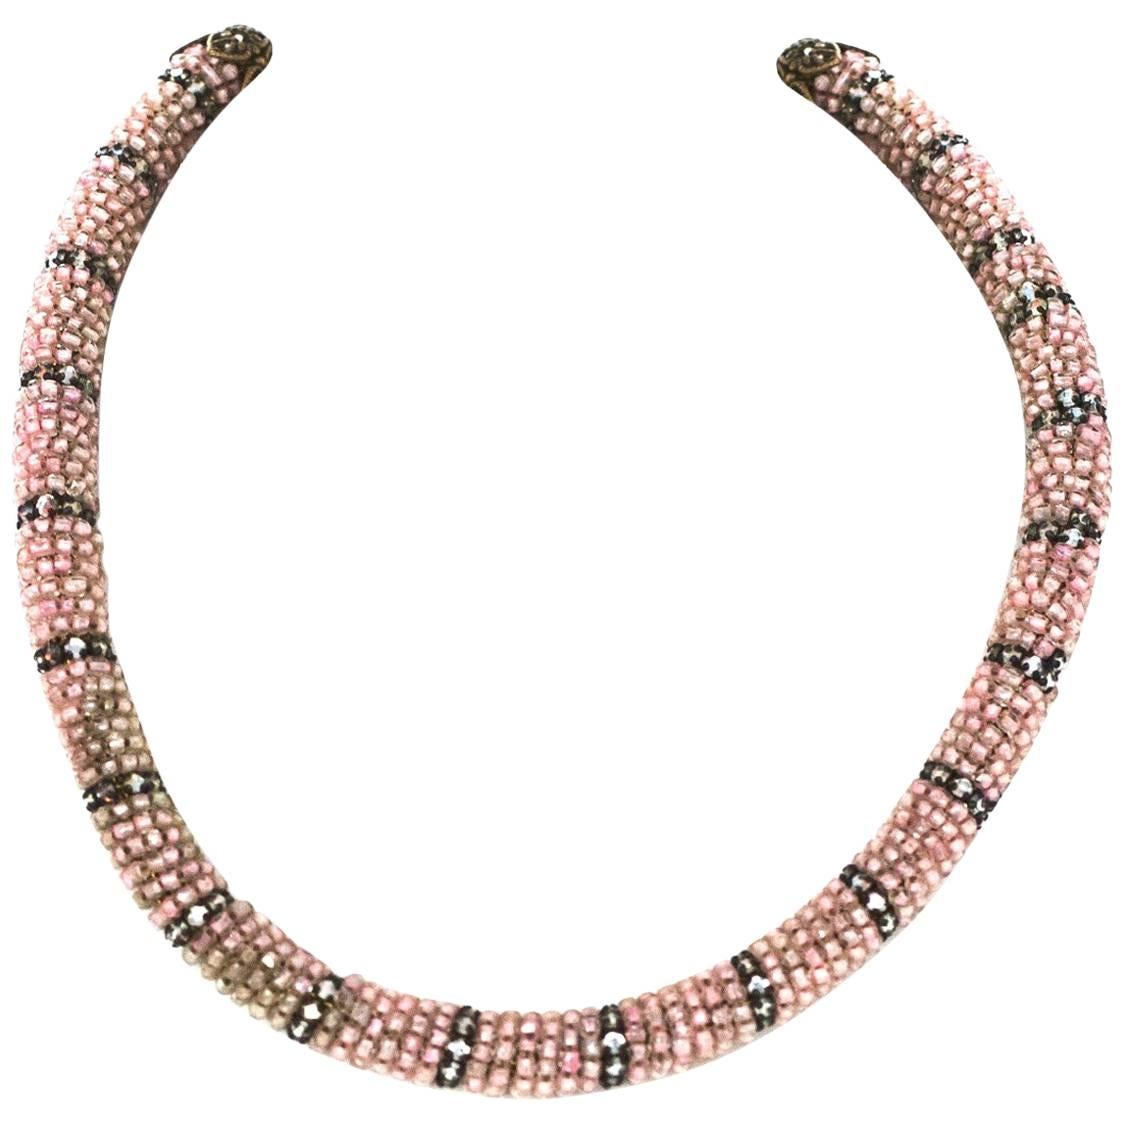 M. Haskell Beaded Necklace

Color: Pink
Materials: Beads, metal
Closure: Hook closure
Stamp: Miriam Haskell
Overall Condition: Very good pre-owned condition with the exception of some fading to color of beads
Measurements: 
Length: 14"